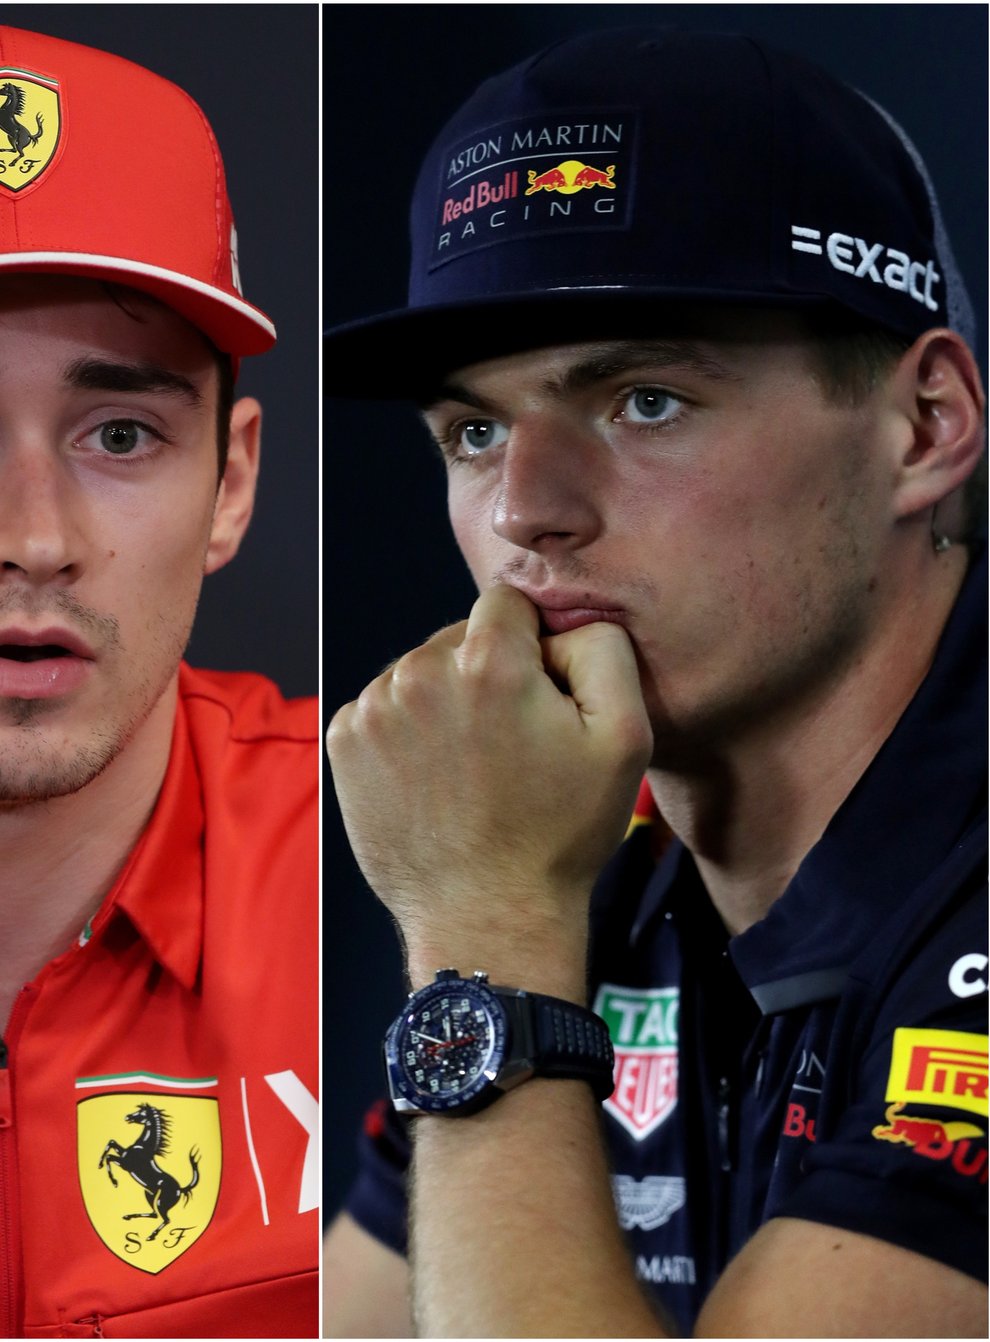 Charles Leclerc and Max Verstappen will not "take a knee" before the Austrian Grand Prix